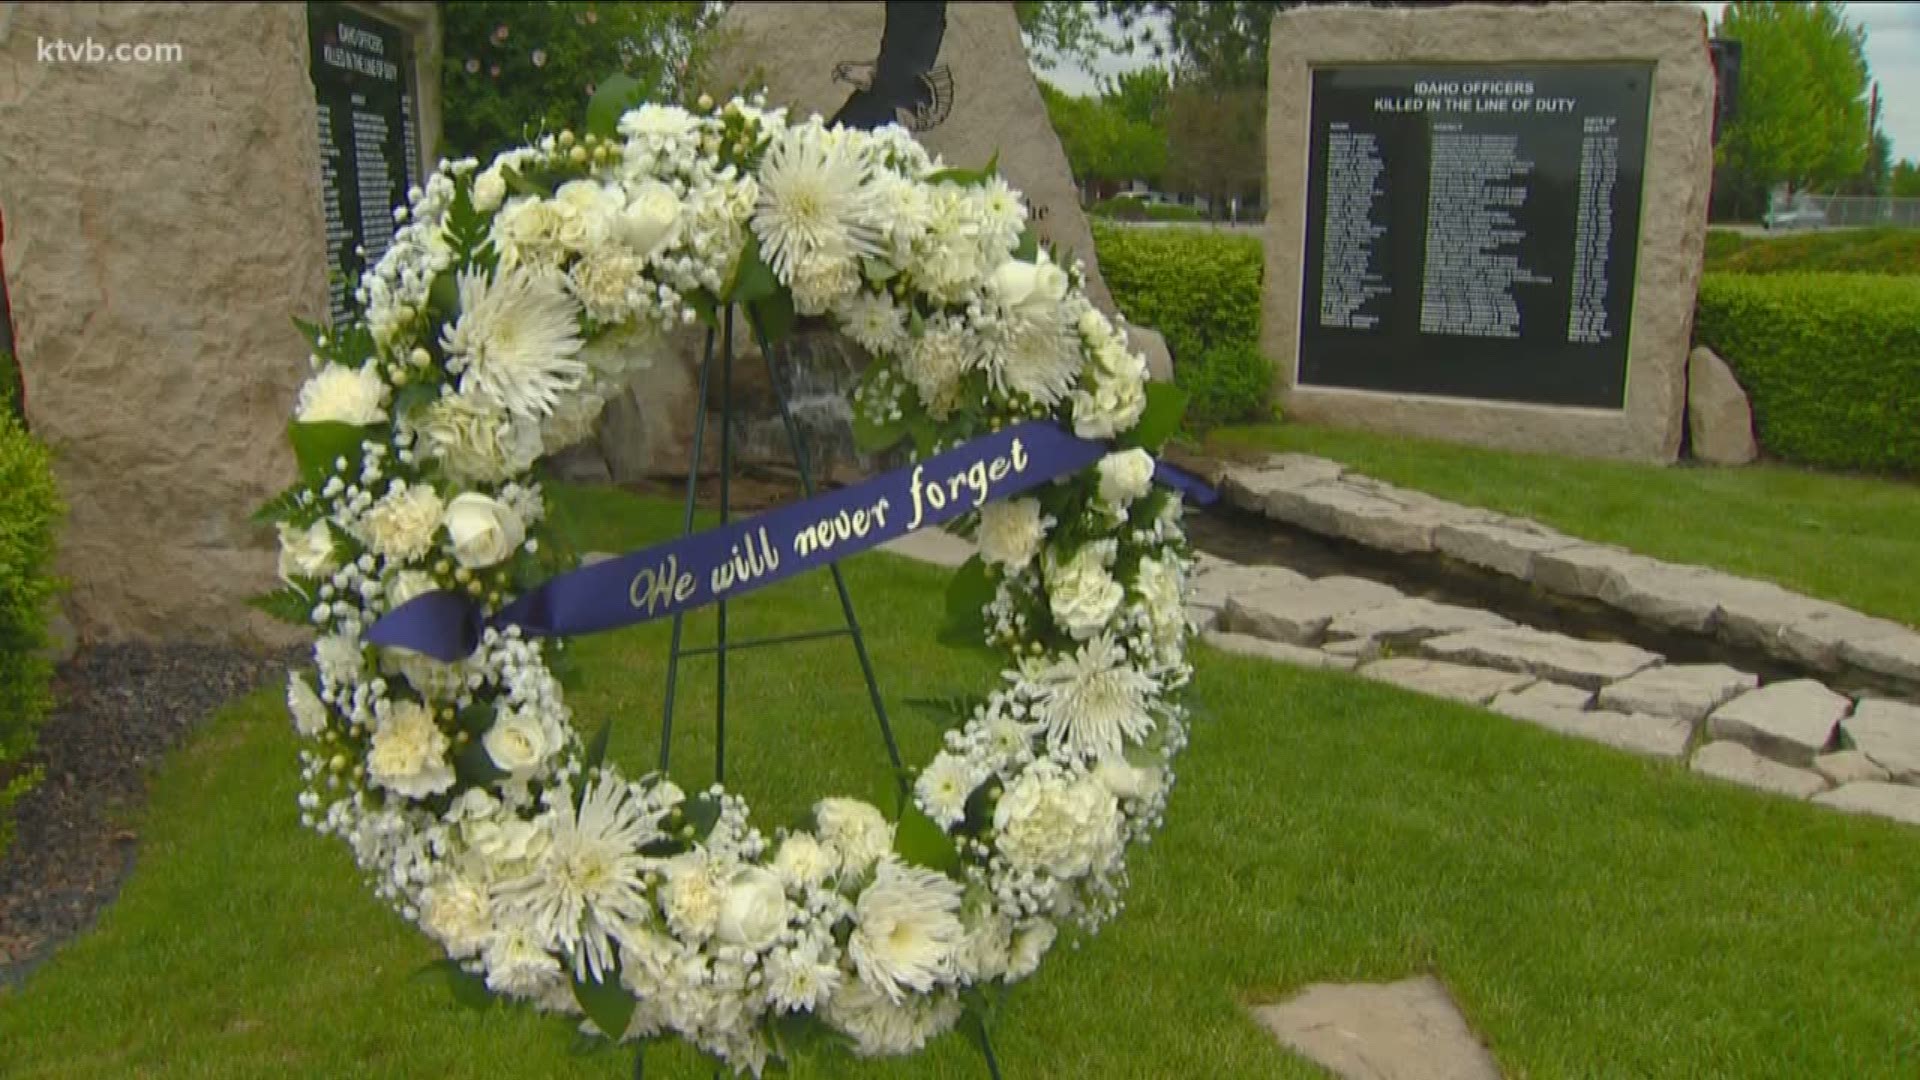 A ceremony was held at the Idaho Peace Officers' Memorial.